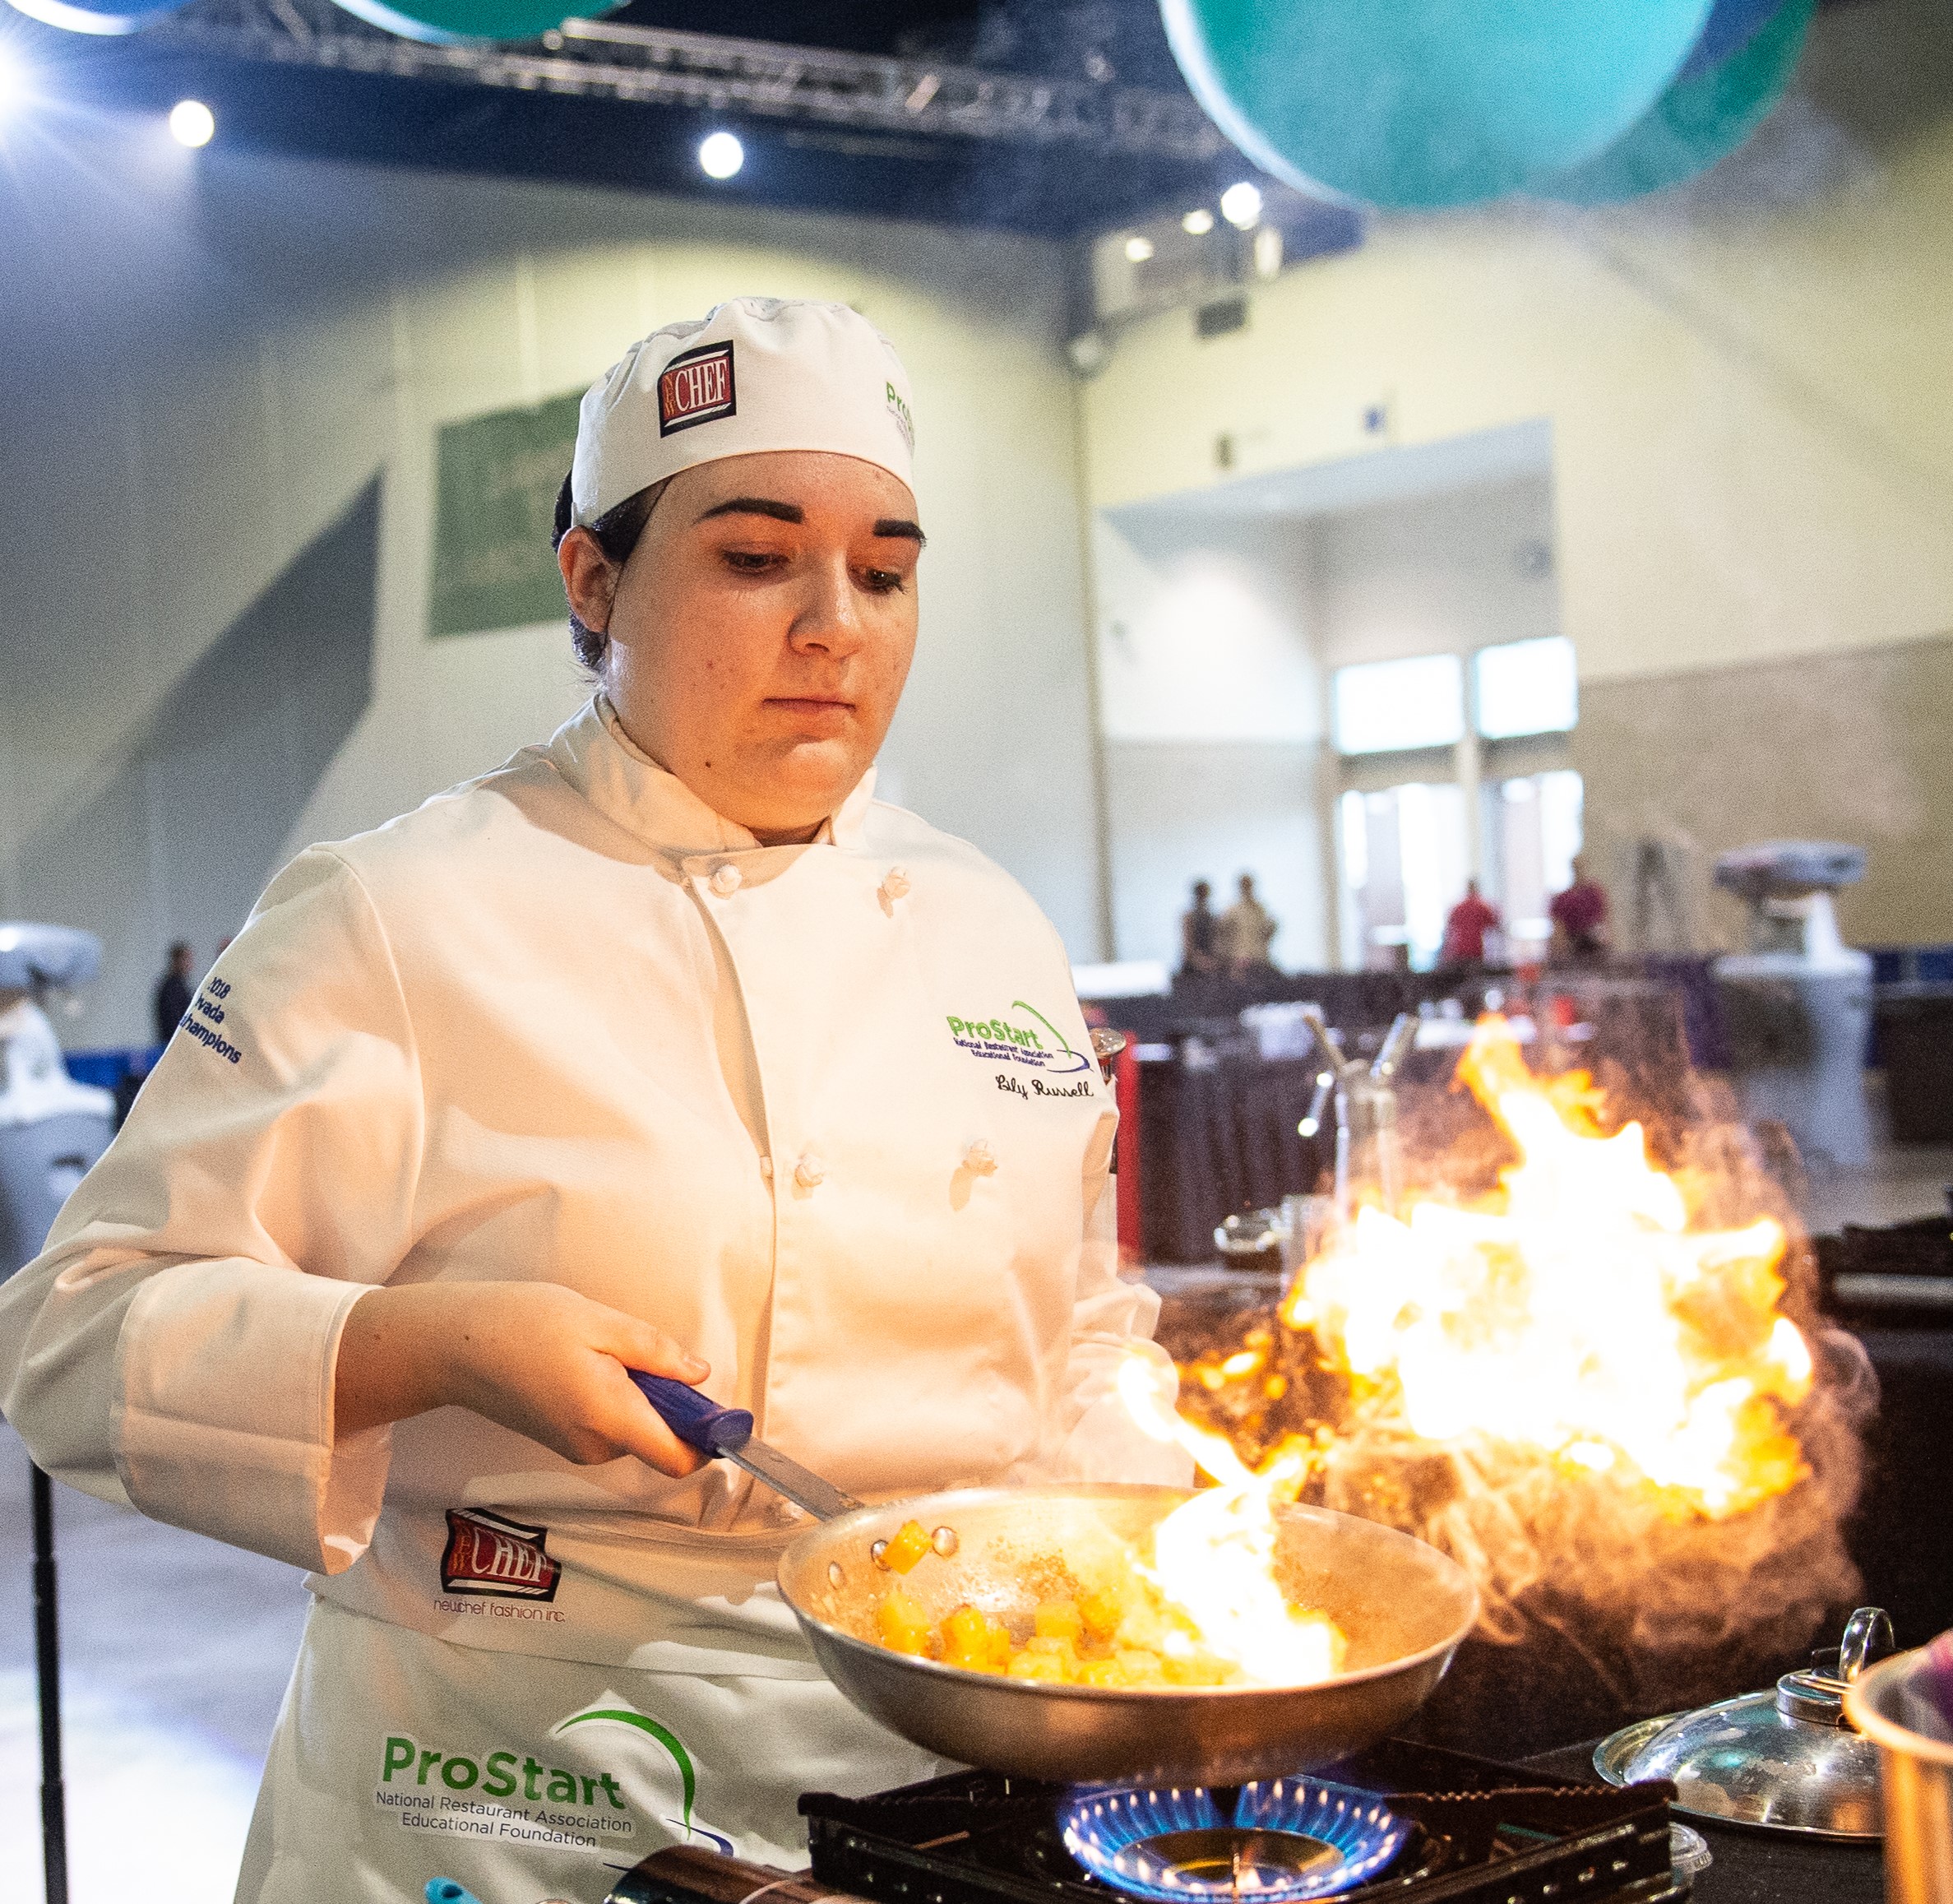 ProStart students prepare their three course meals in the culinary competition during the 2018 National ProStart Invitational in Providence, Rhode Island. Over 400 students compete for top scholarships.